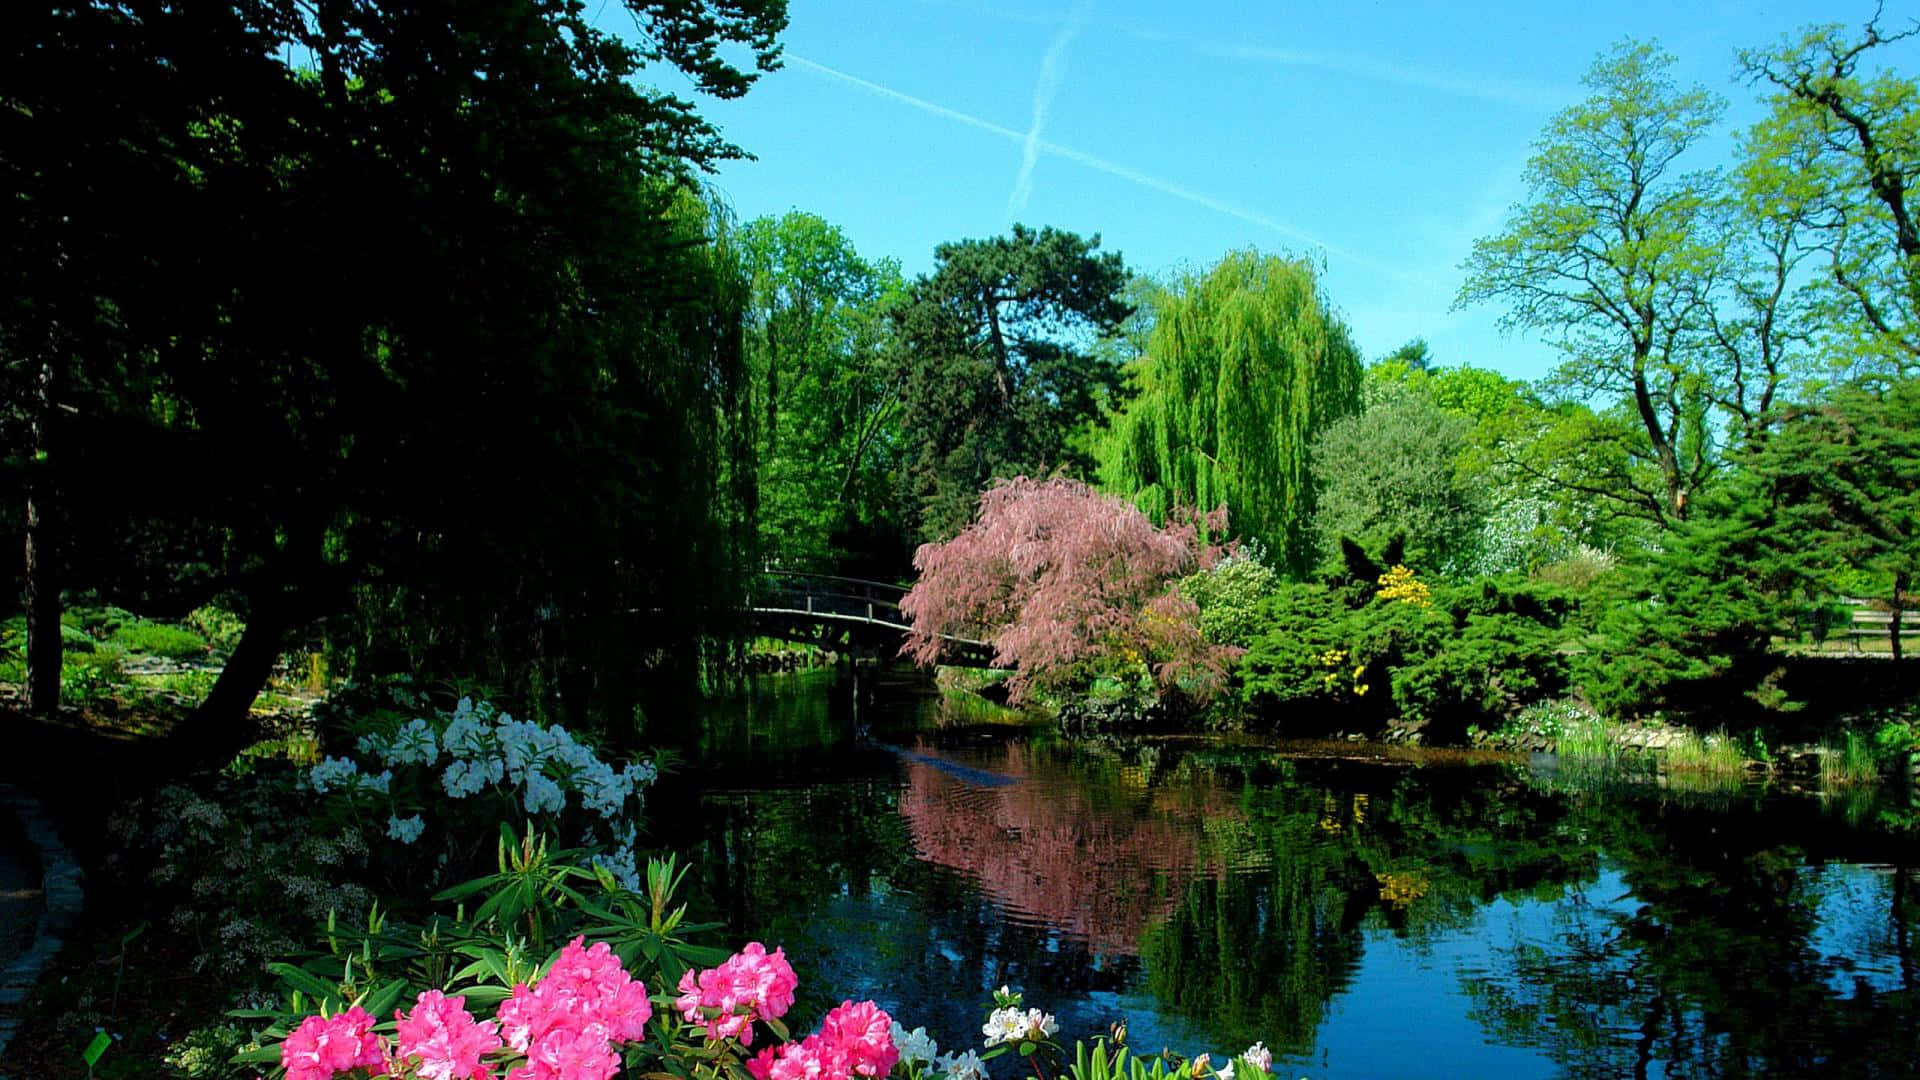 A Pond With Flowers And Trees In The Background Background